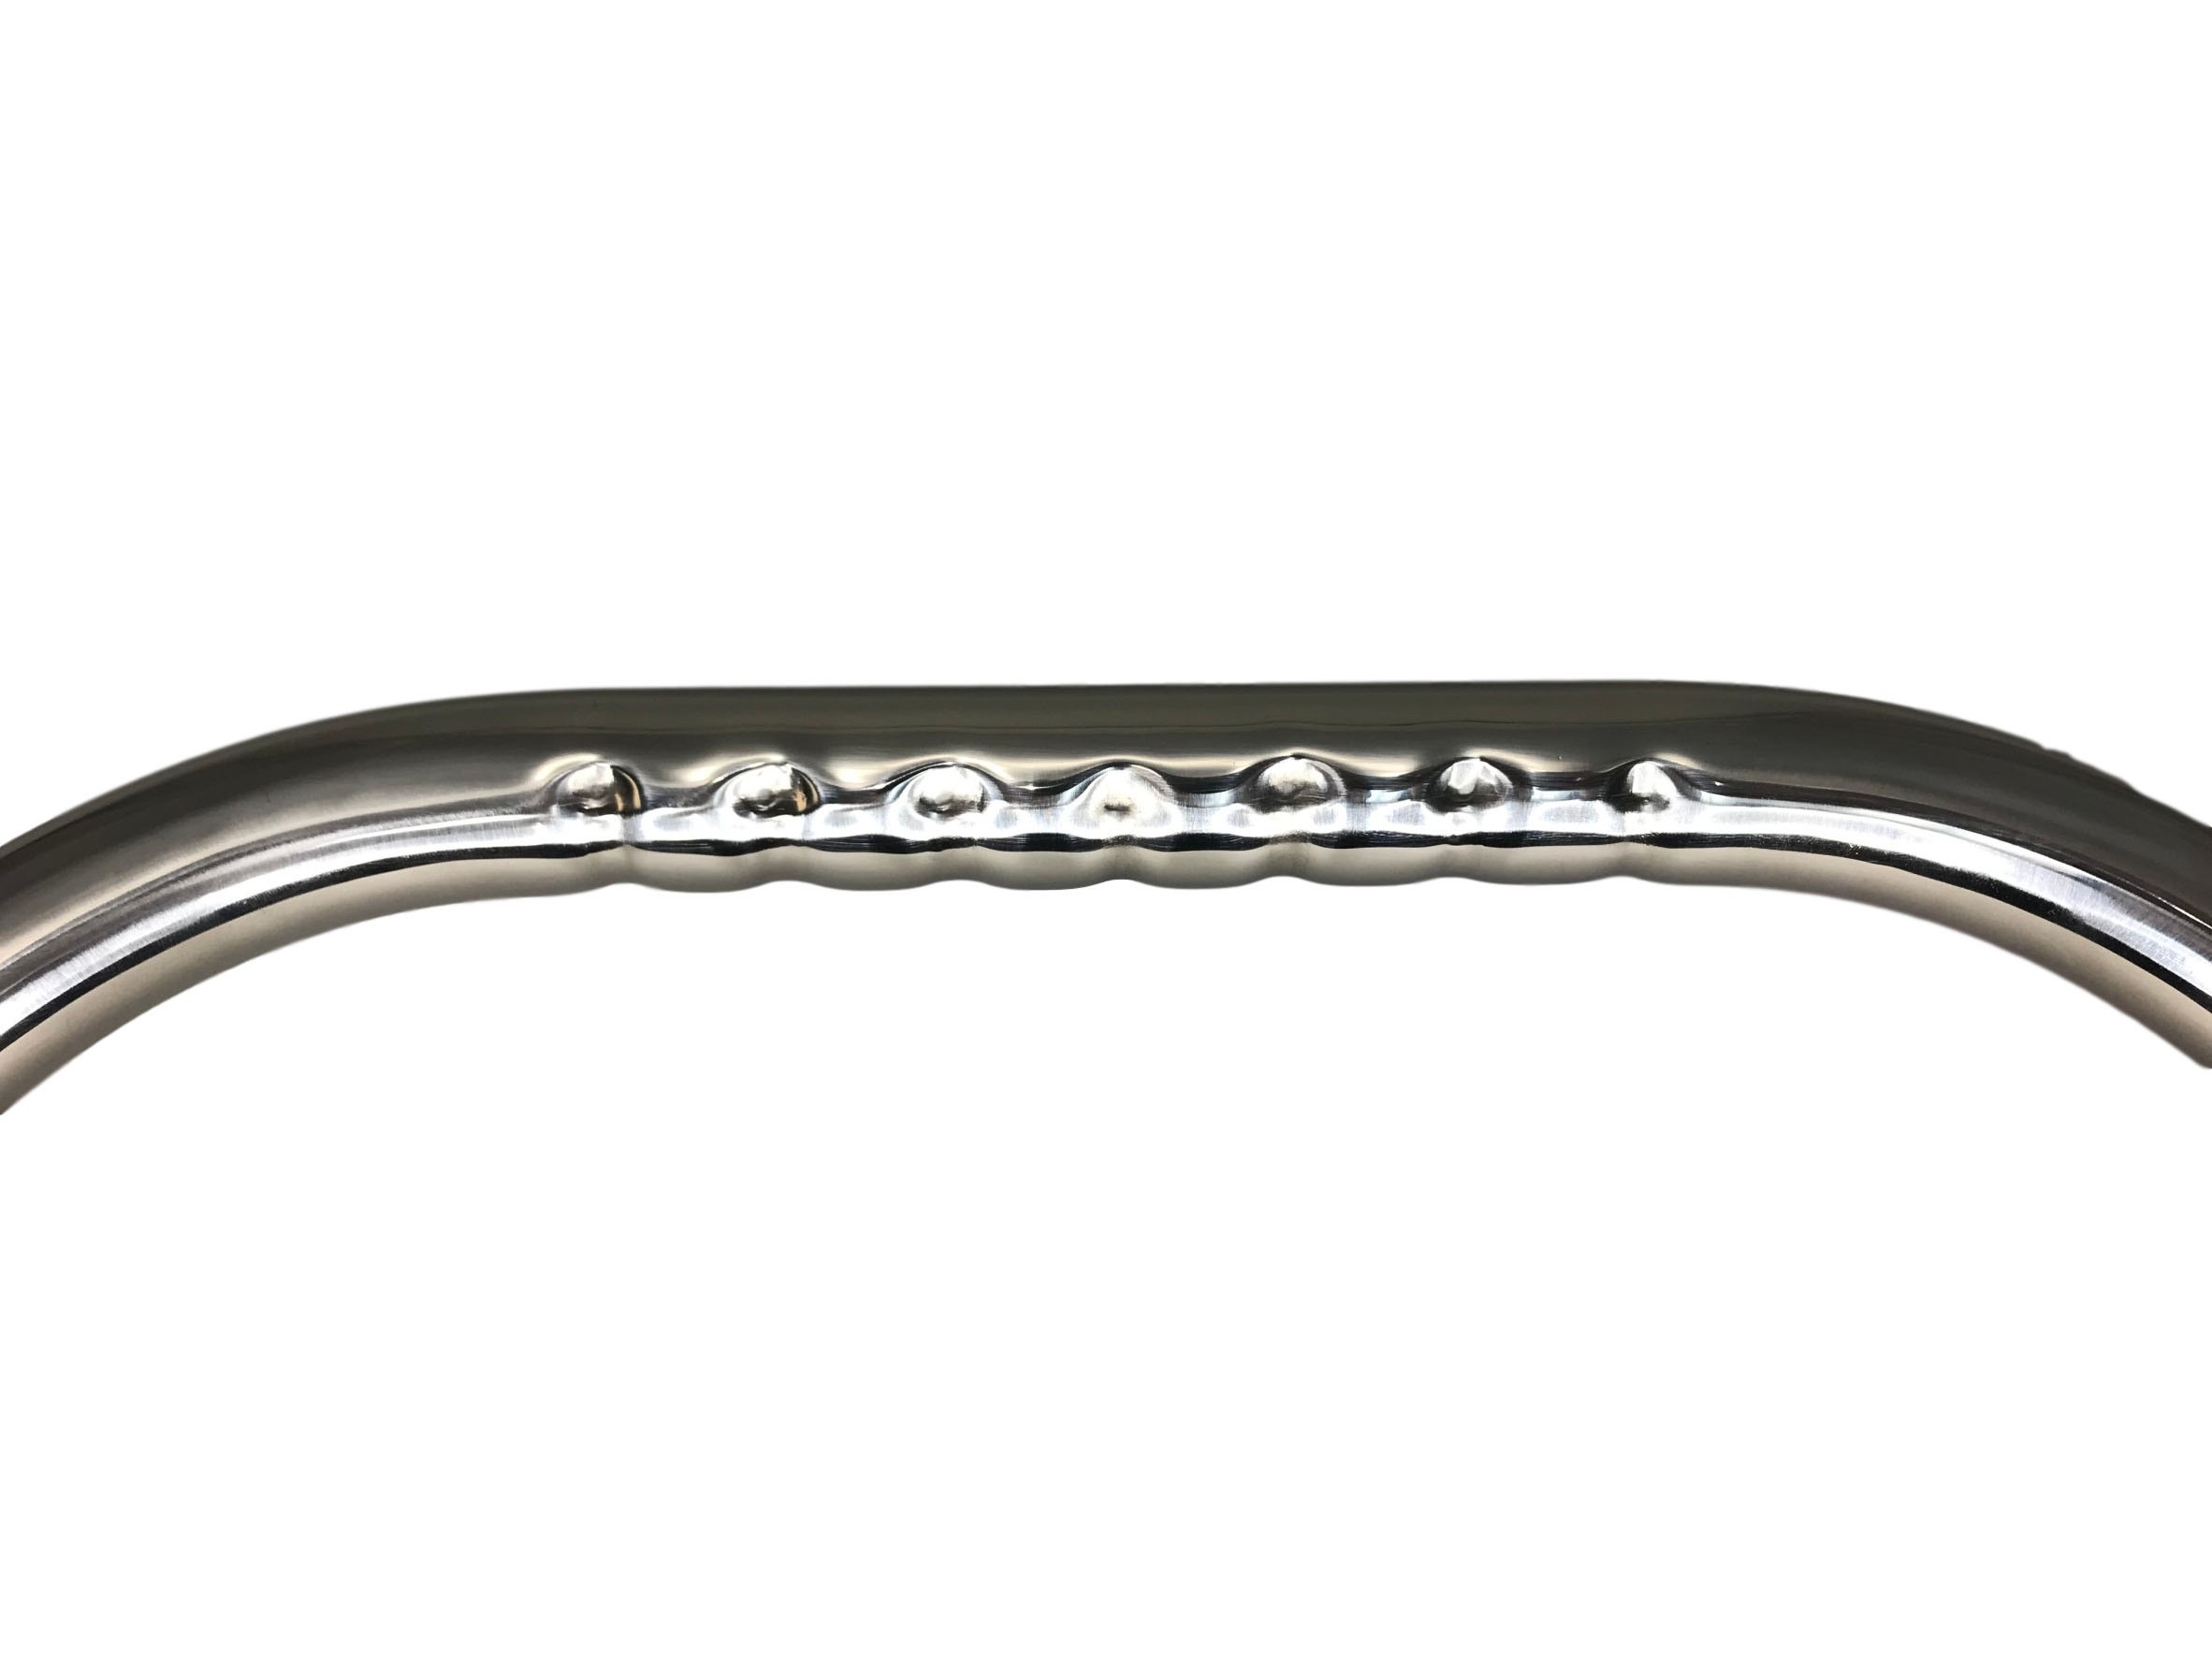 MARINE BOAT STAINLESS STEEL HANDRAIL 12 INCHES WITH WAVE CURVE